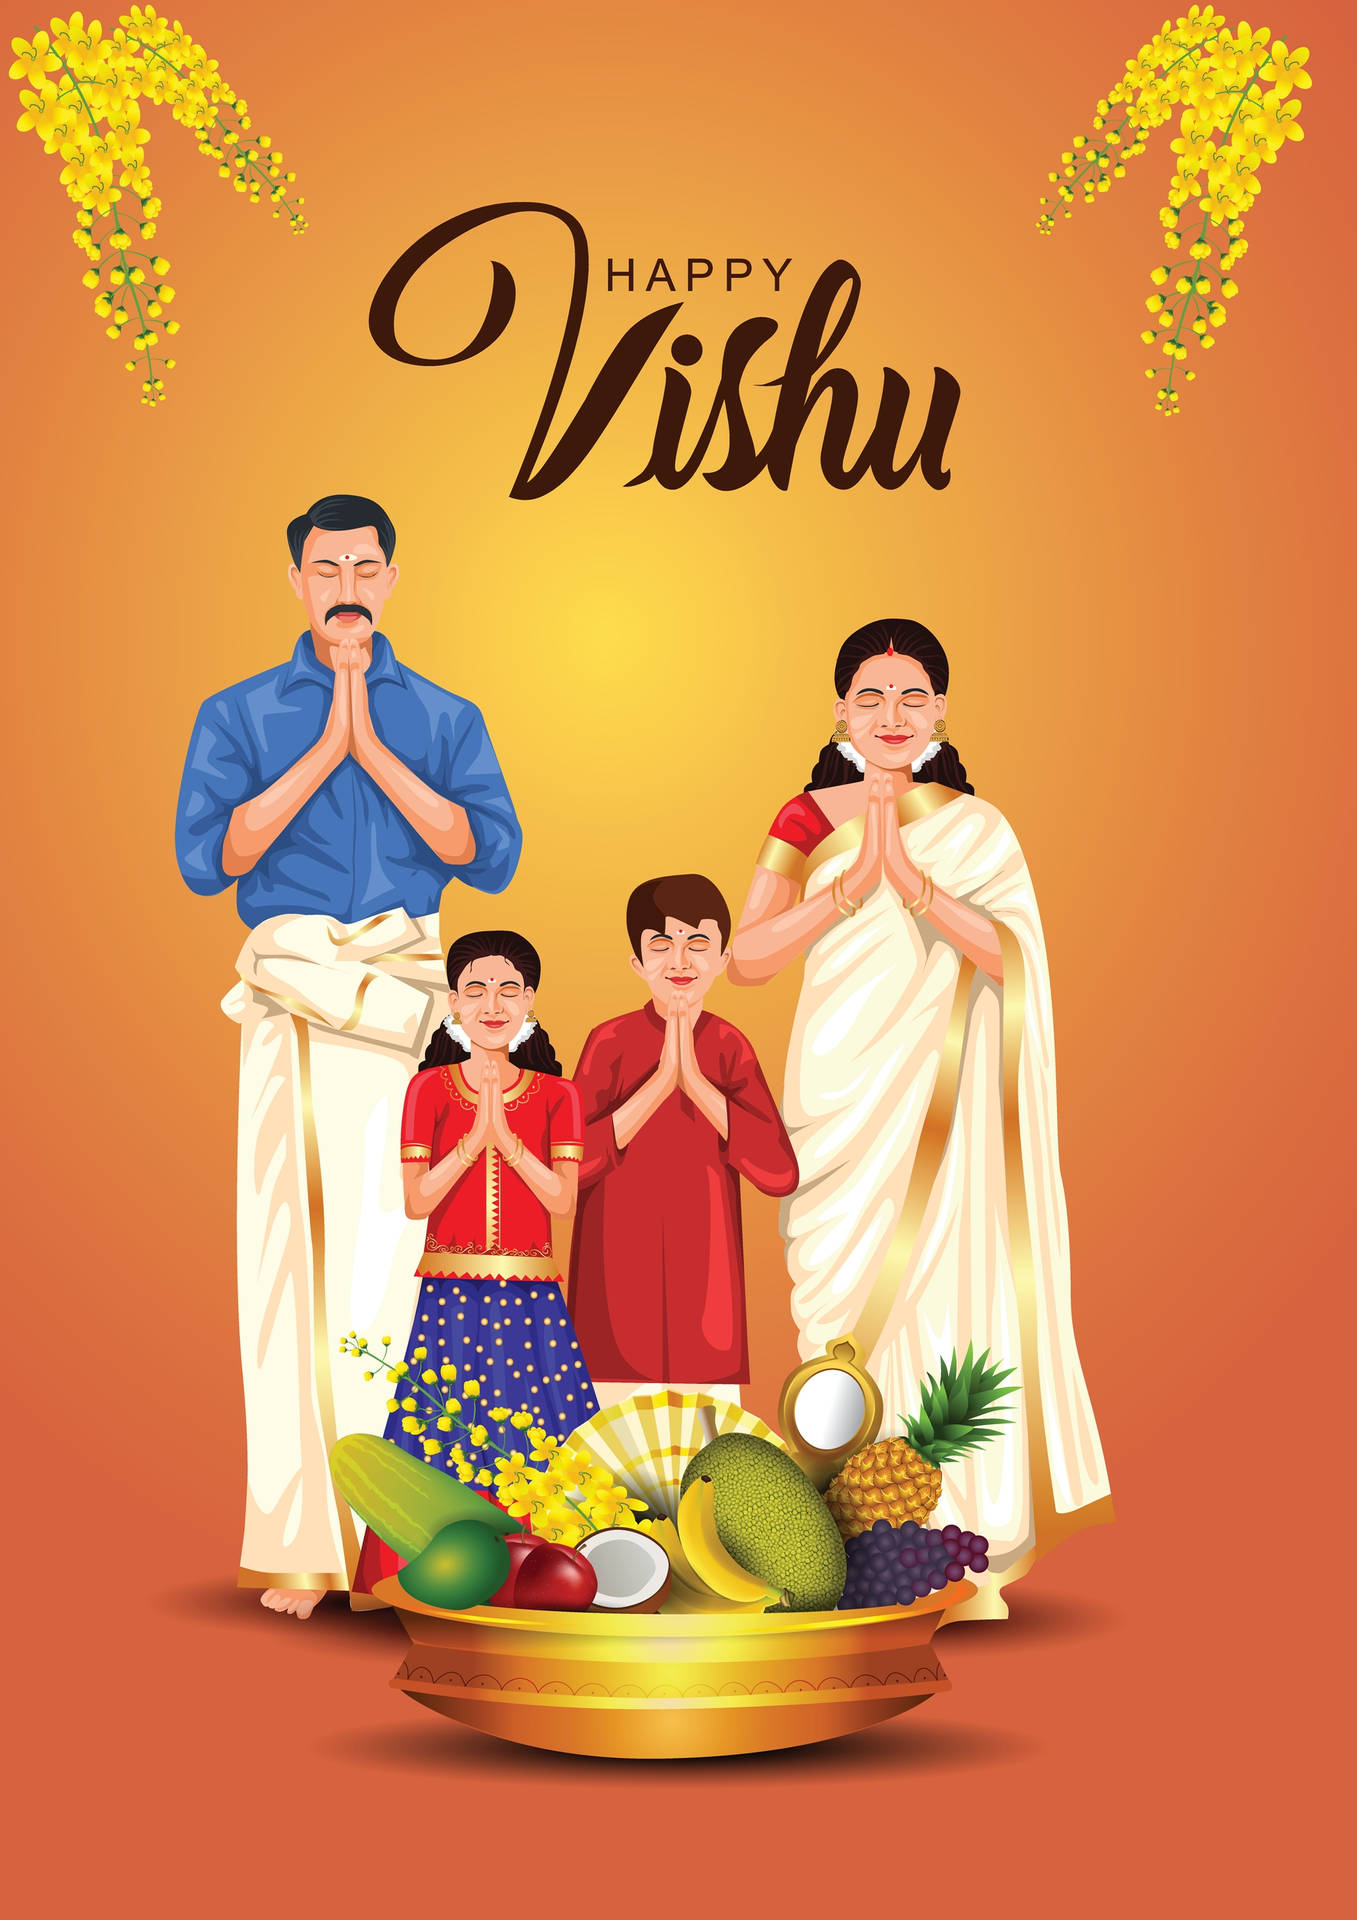 Festivals  Events News  Share Happy Vishu 2023 WhatsApp Messages Images  SMS  HD Wallpapers With Your Loved Ones   LatestLY